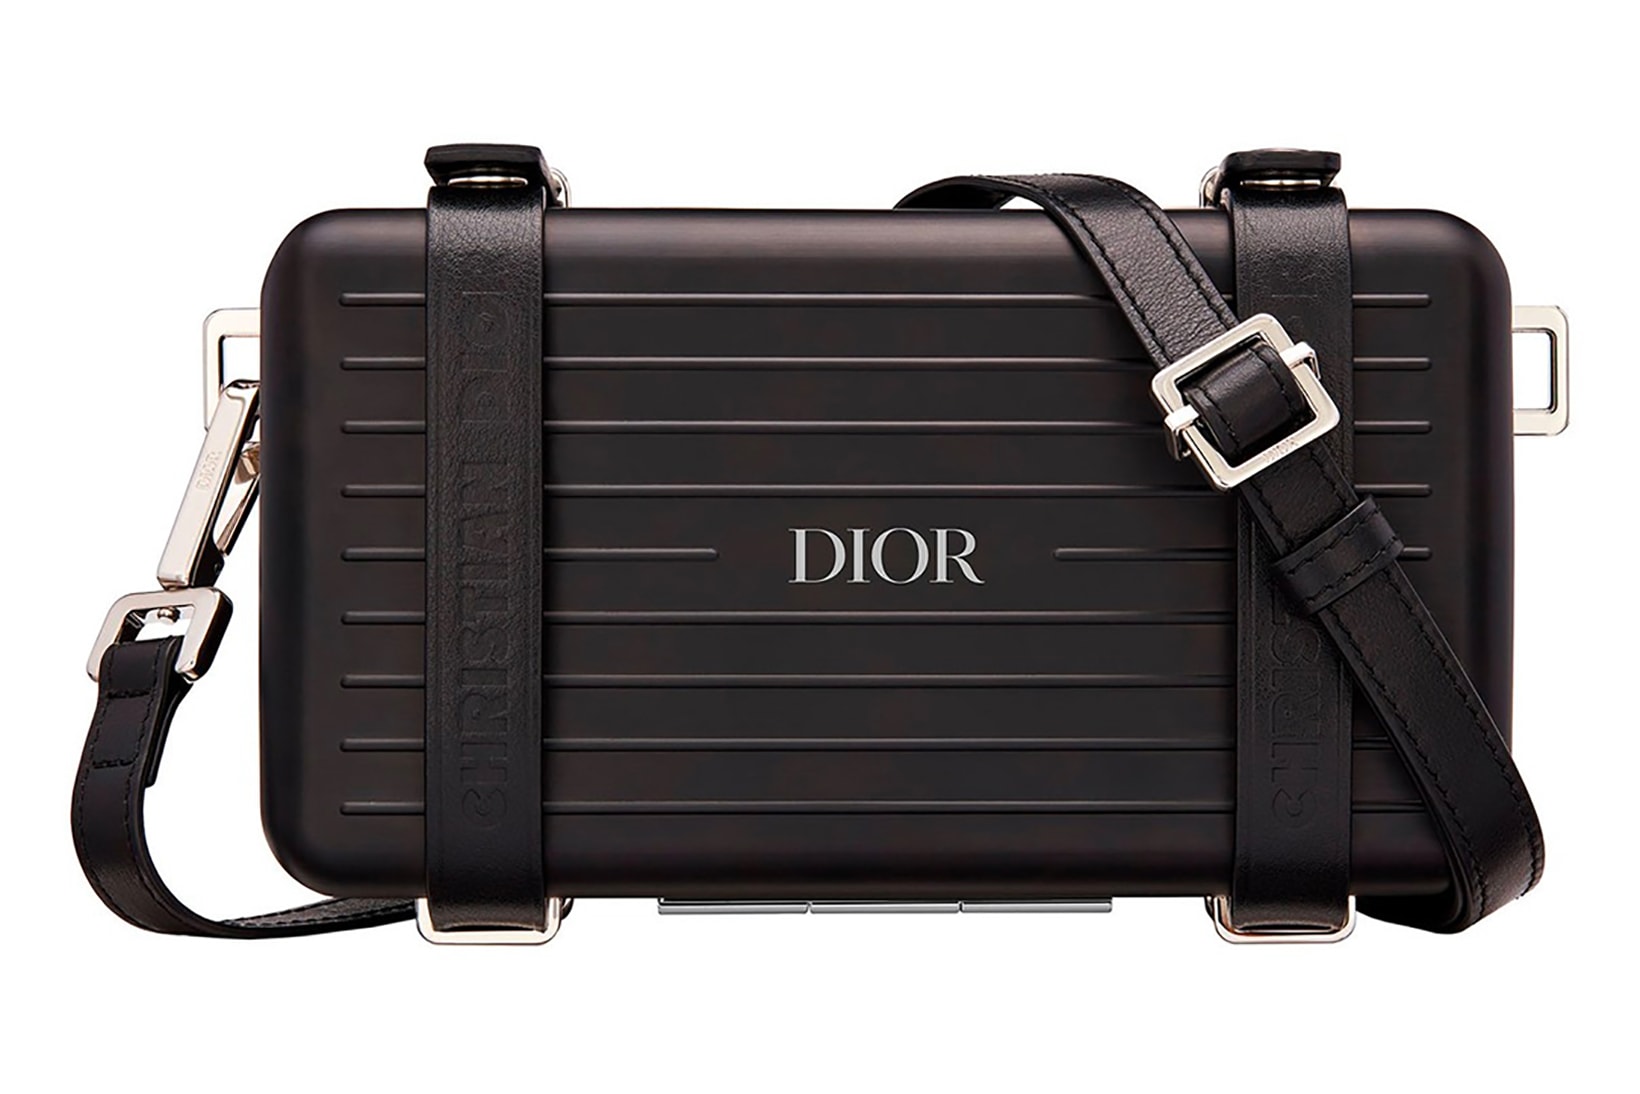 Dior x Rimowa's luggage is now available to buy